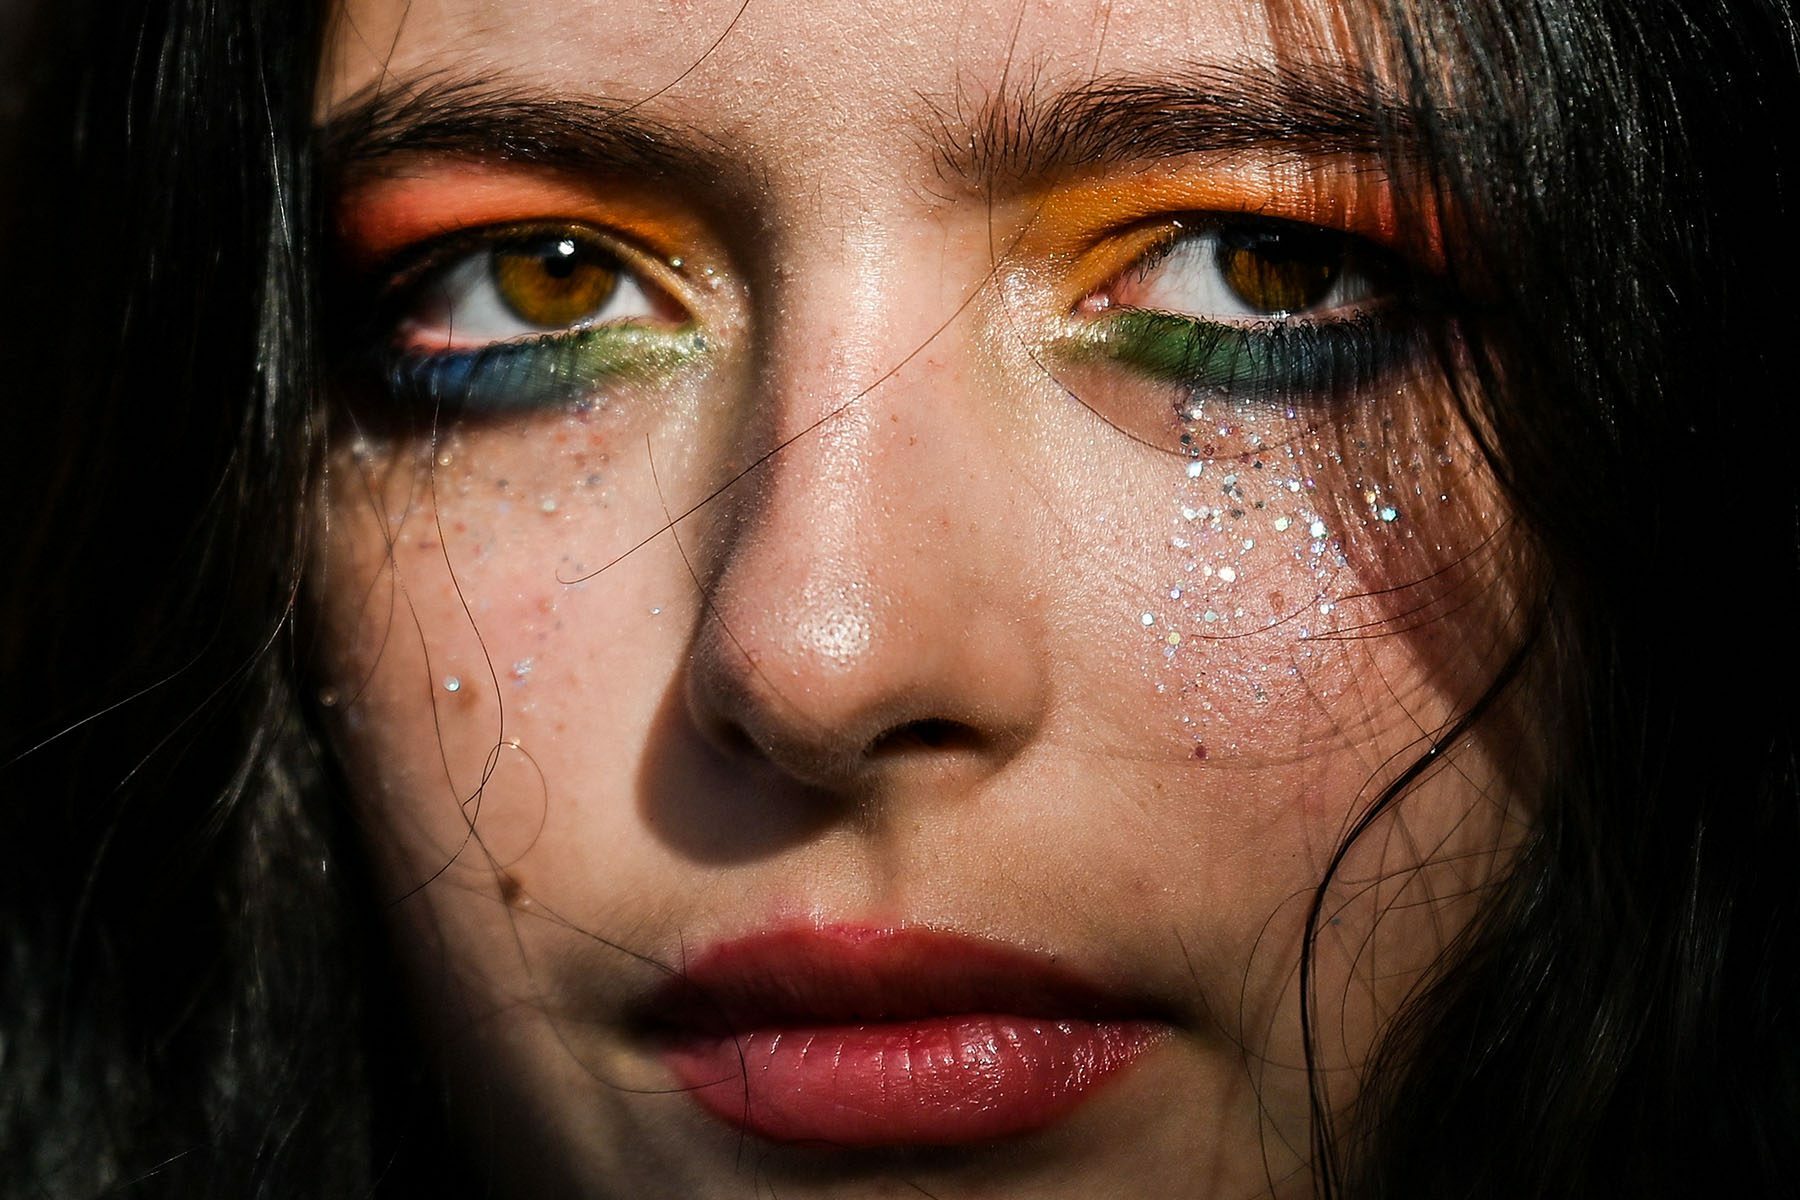 A close up of a person with rainbow colored eye makeup and glitter tears.